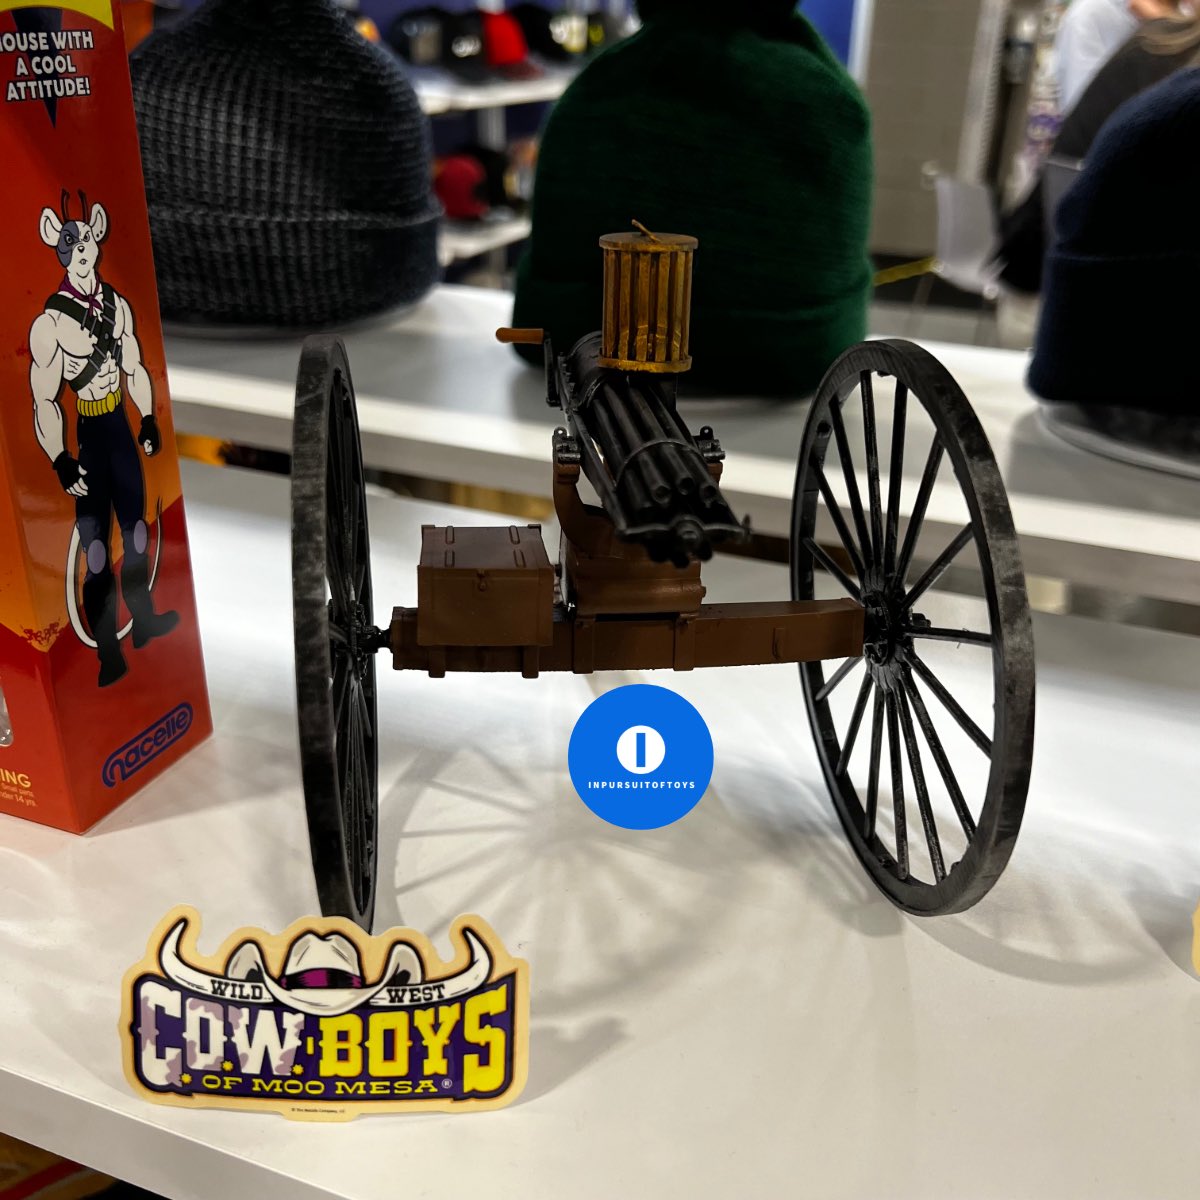 Got to meet up with the guys from the @toysnacelle booth at Licensing Expo, where they had the new Wild West C.O.W.-Boys of Moo Mesa figures on display. 

#nacelleverse #nacellecompany #nacelletoys #cowboysofmoomesa #licensingexpo #actionfigures #actionfigure #toynews